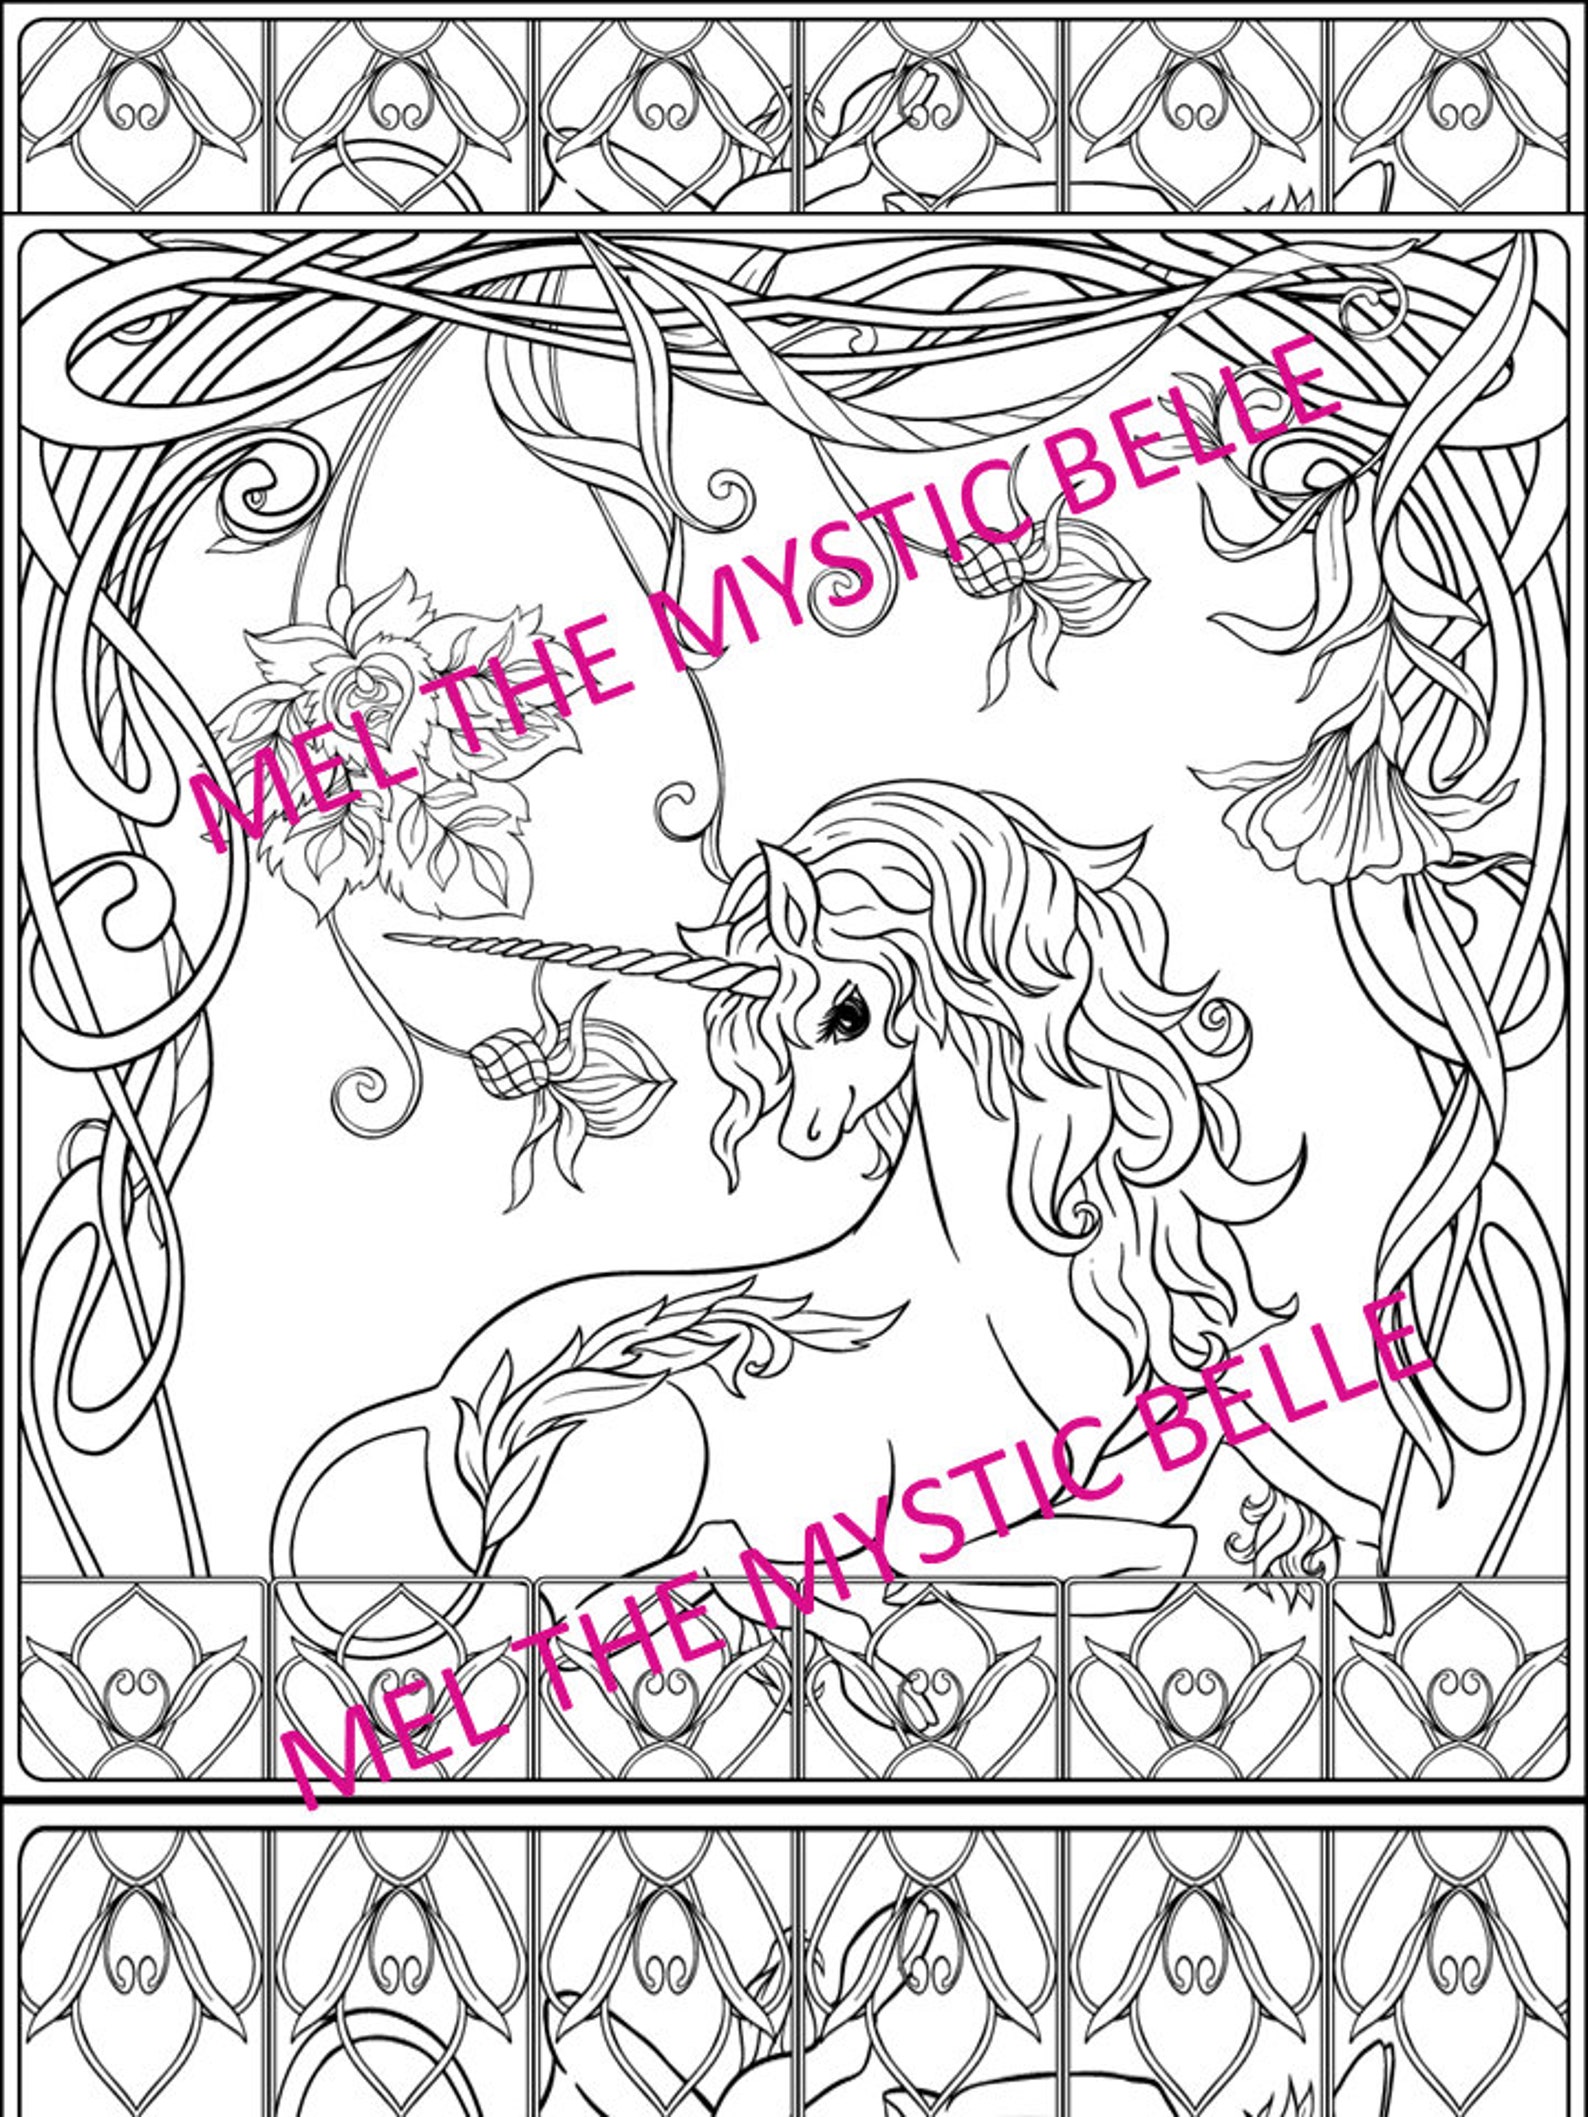 The Last Unicorn Inspired Coloring Pages | Etsy